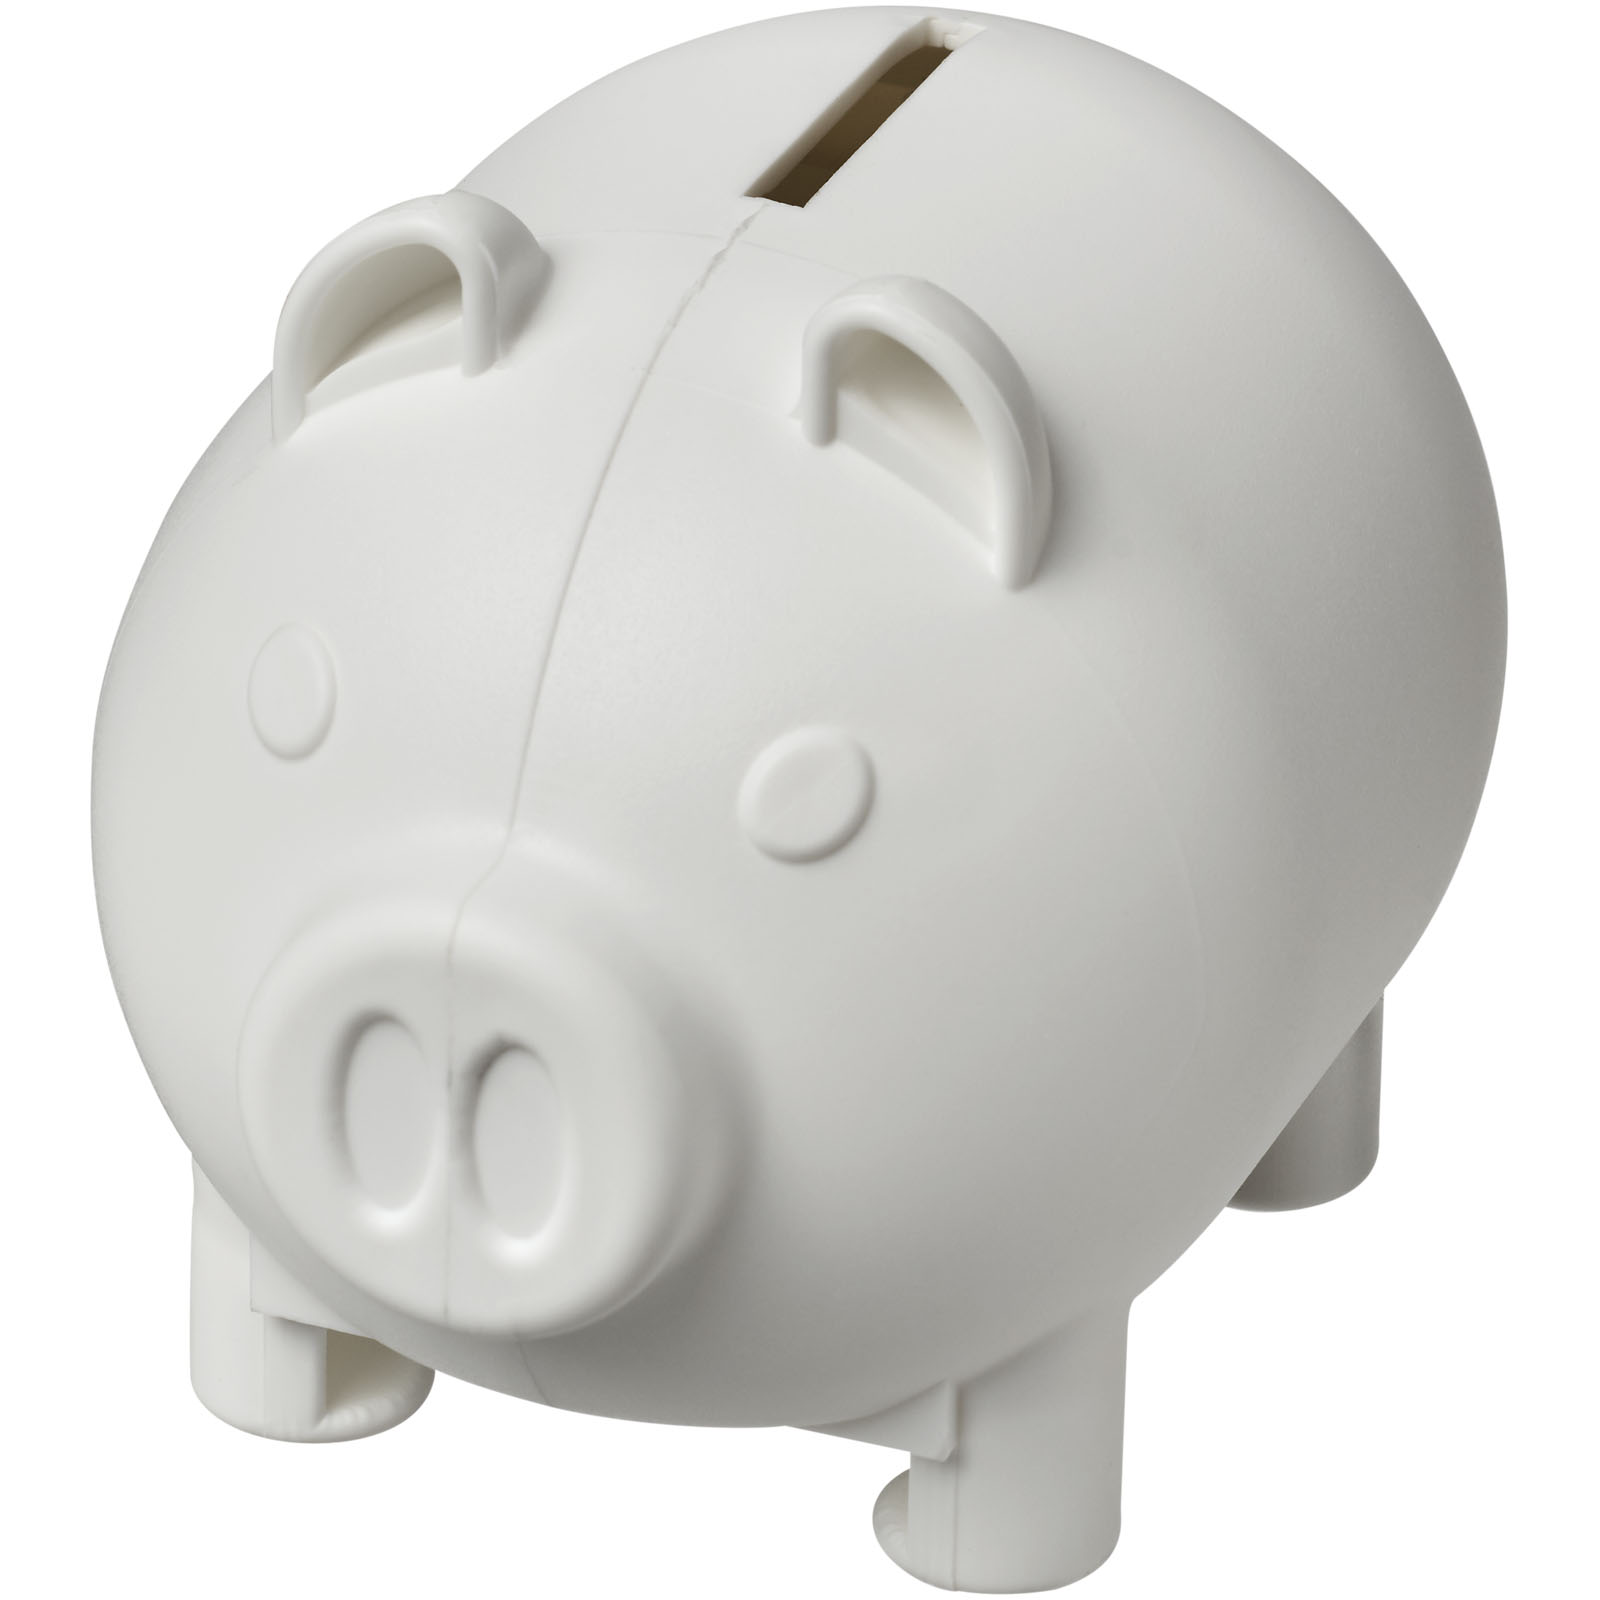 Home Accessories - Oink recycled plastic piggy bank